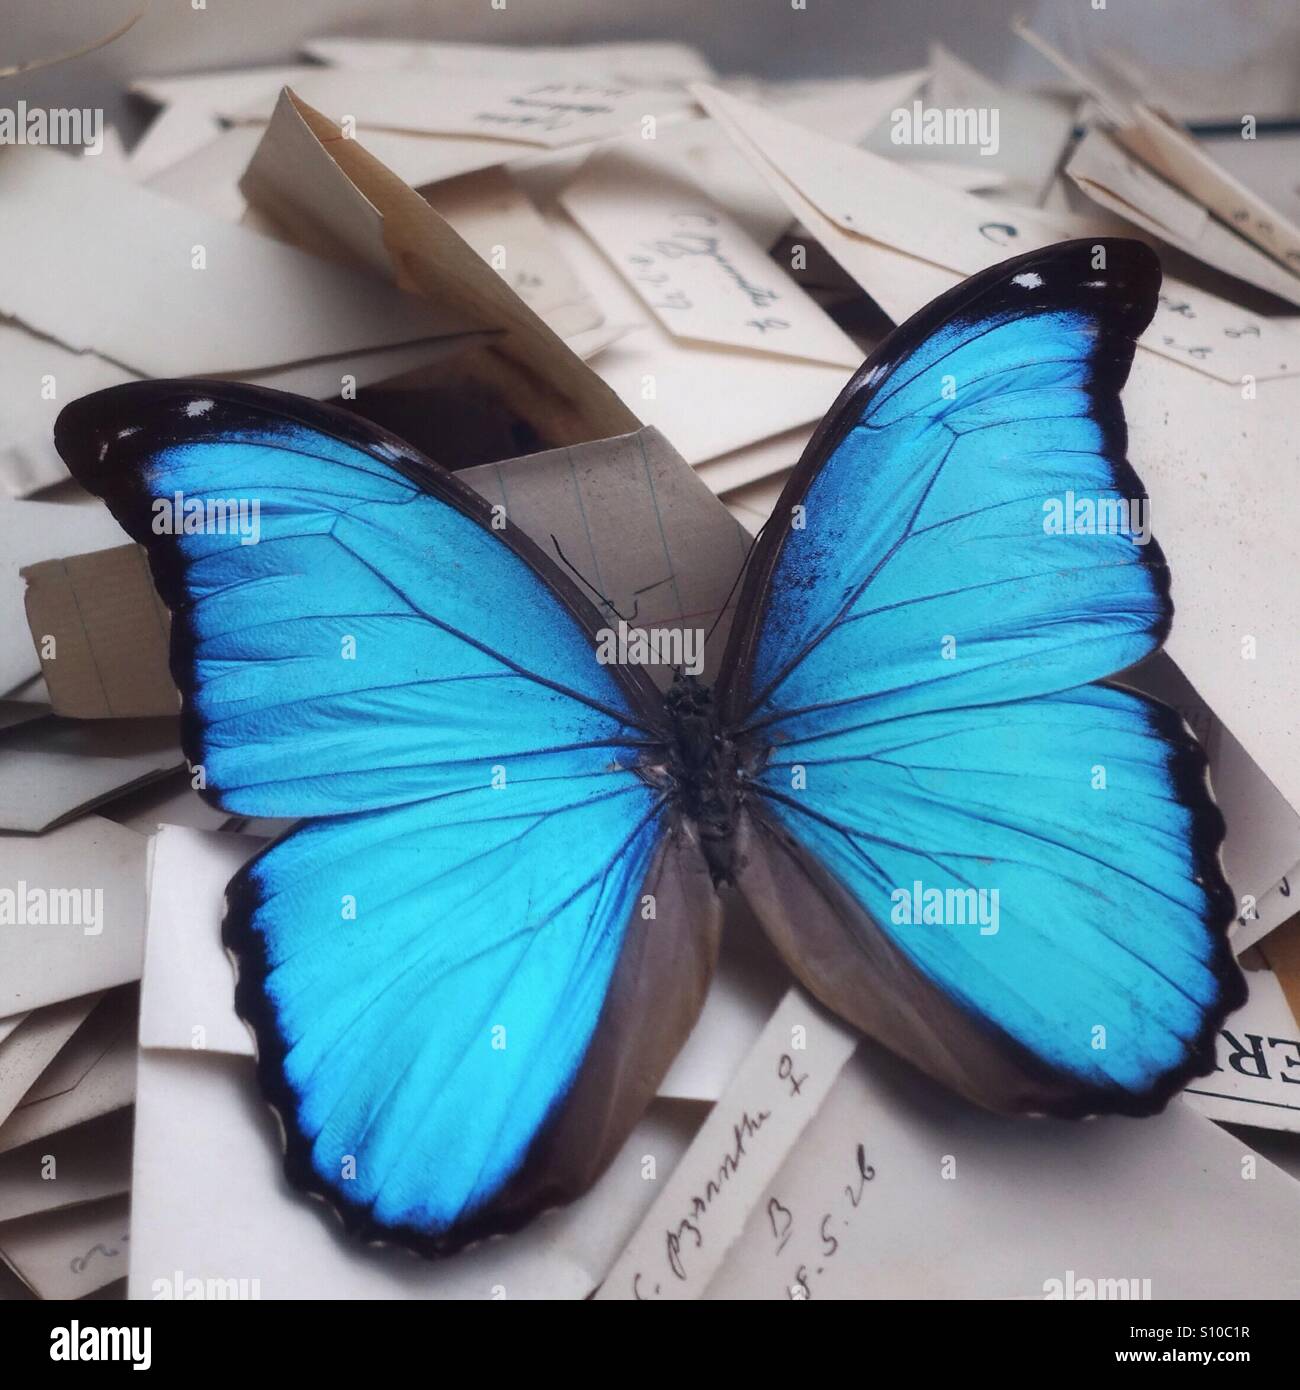 Bright blue butterfly on hand written notes Stock Photo